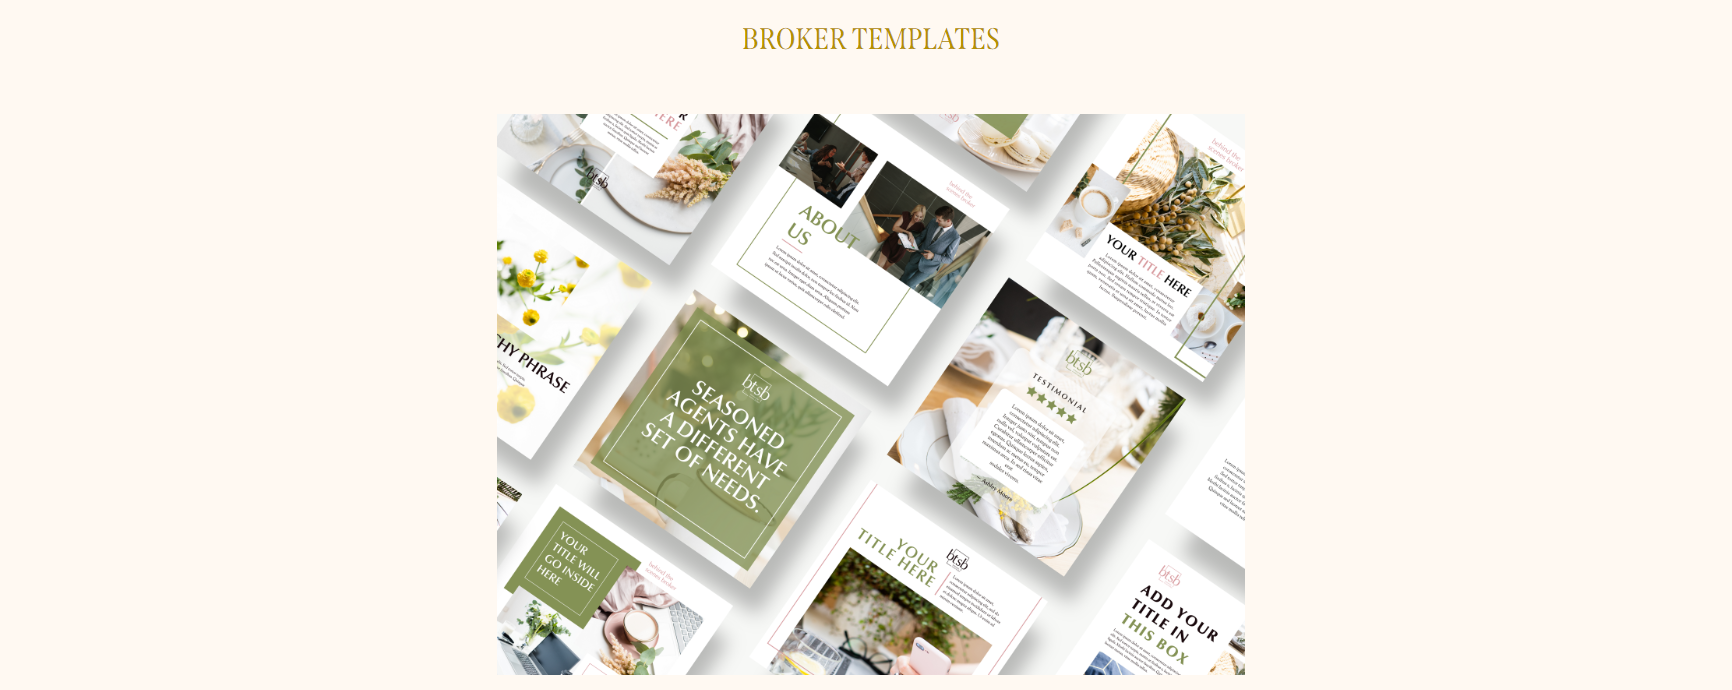 Templates we made for Real Estate Broker